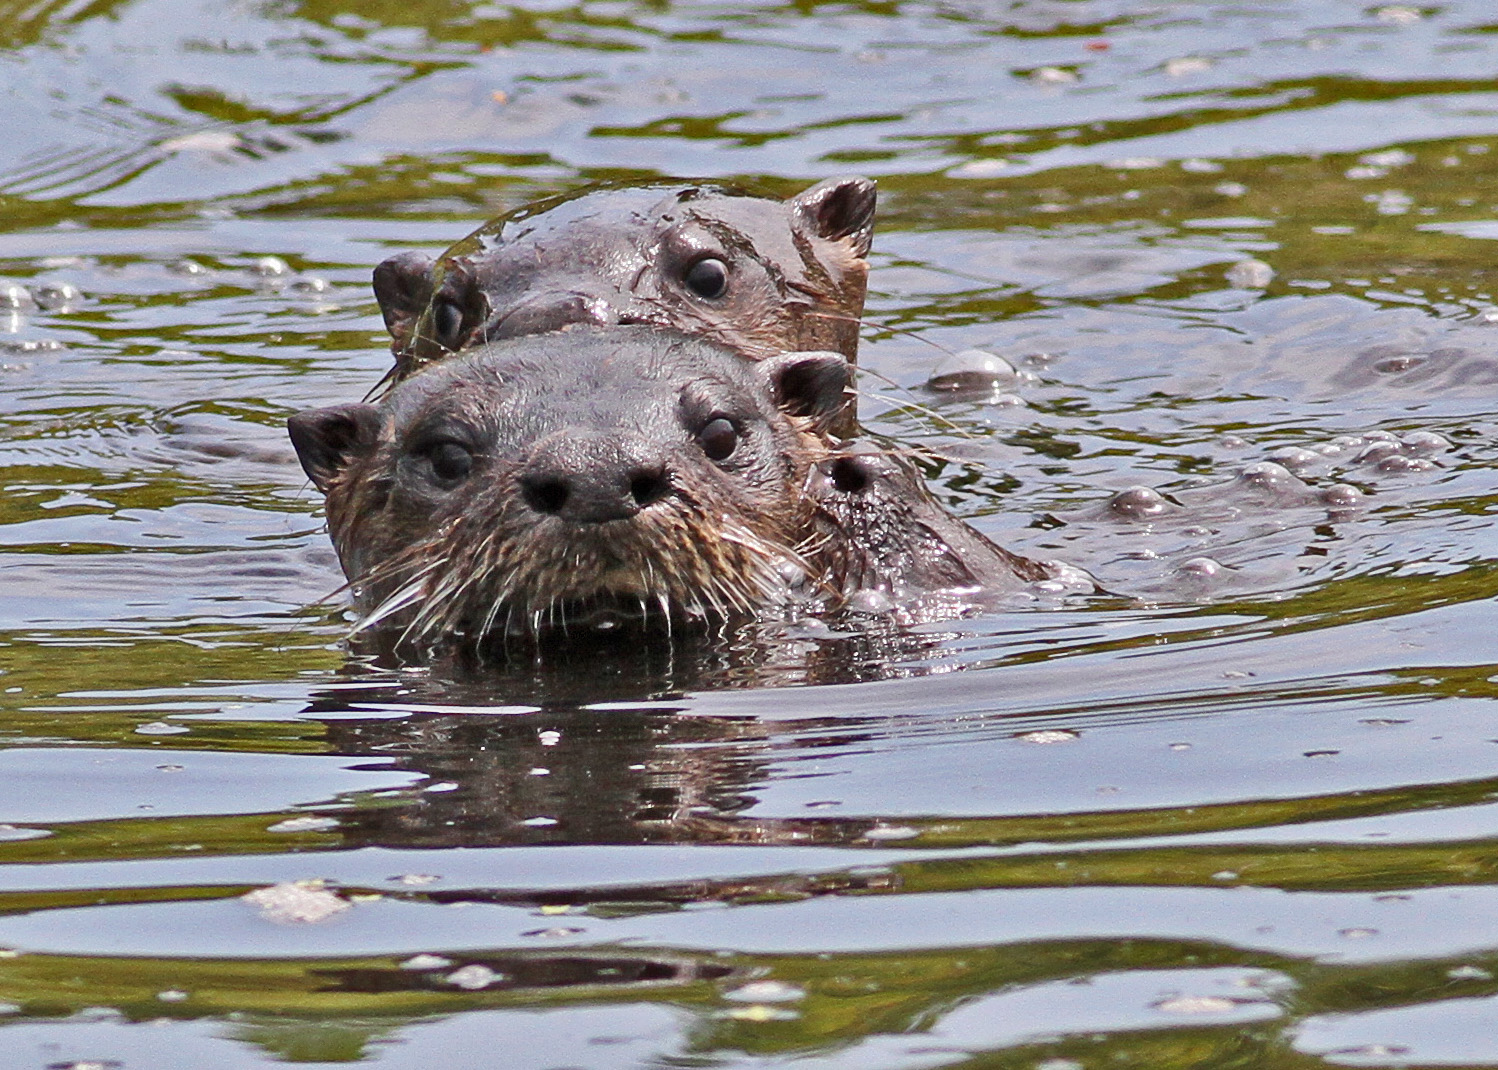 Two river otter swimming with only their head above water.